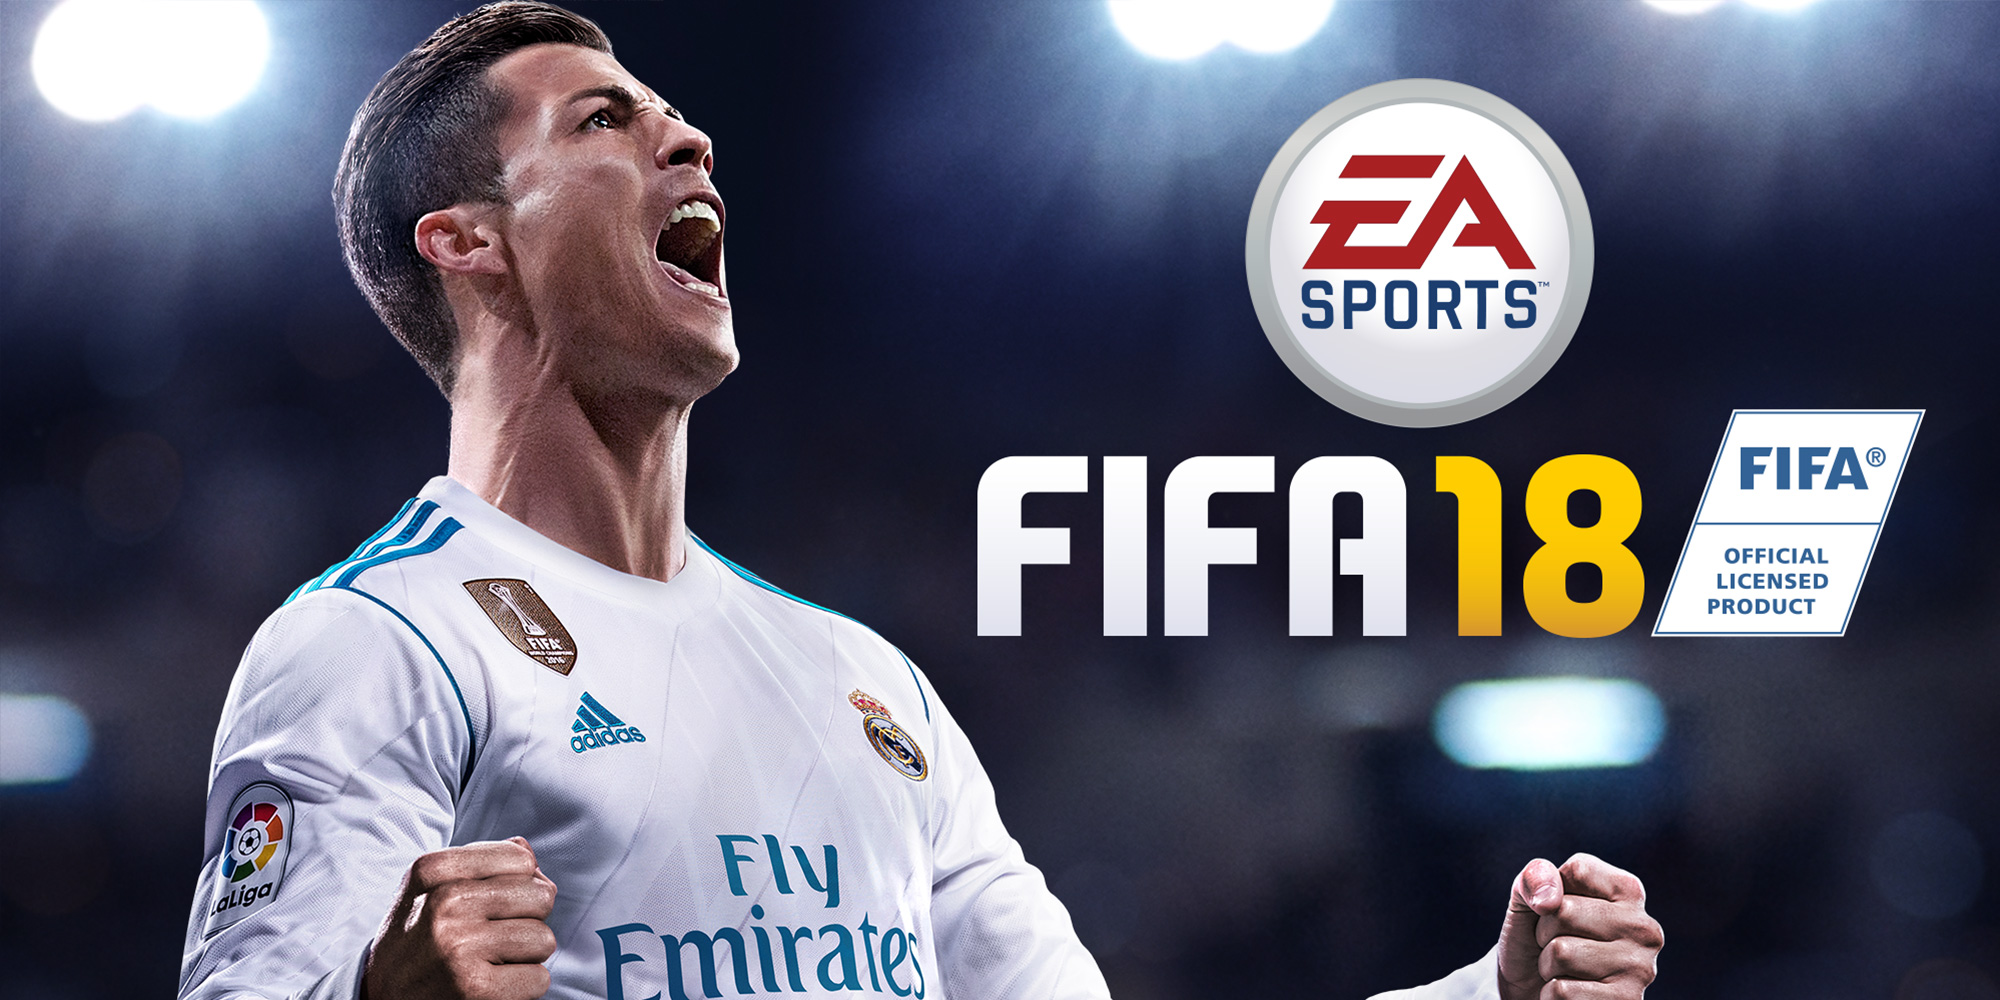 FIFA 18 PC Game Latest Version Free Download